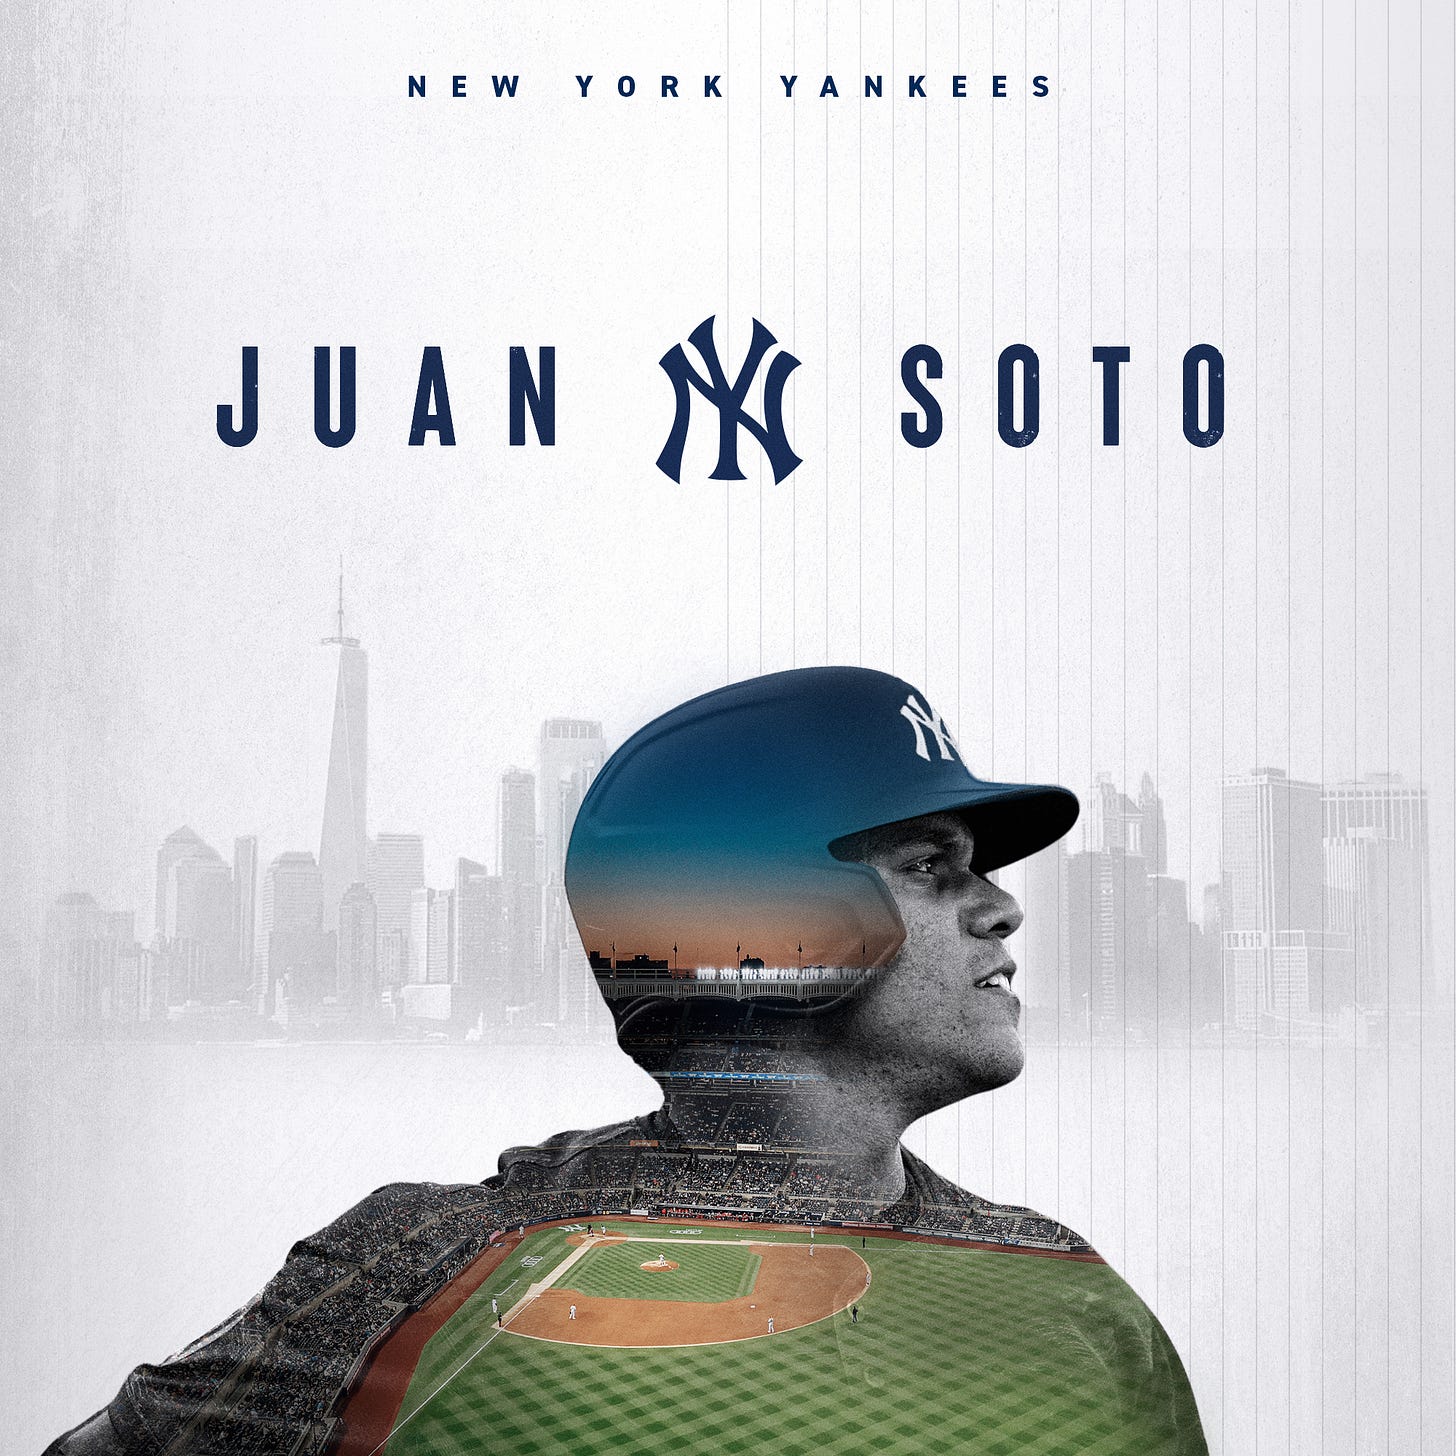 New York Yankees - Juan Soto

Juan Soto with a photo of Yankee Stadium overlayed on his helmet and uniform. Black & white skyline of NYC in the background. 